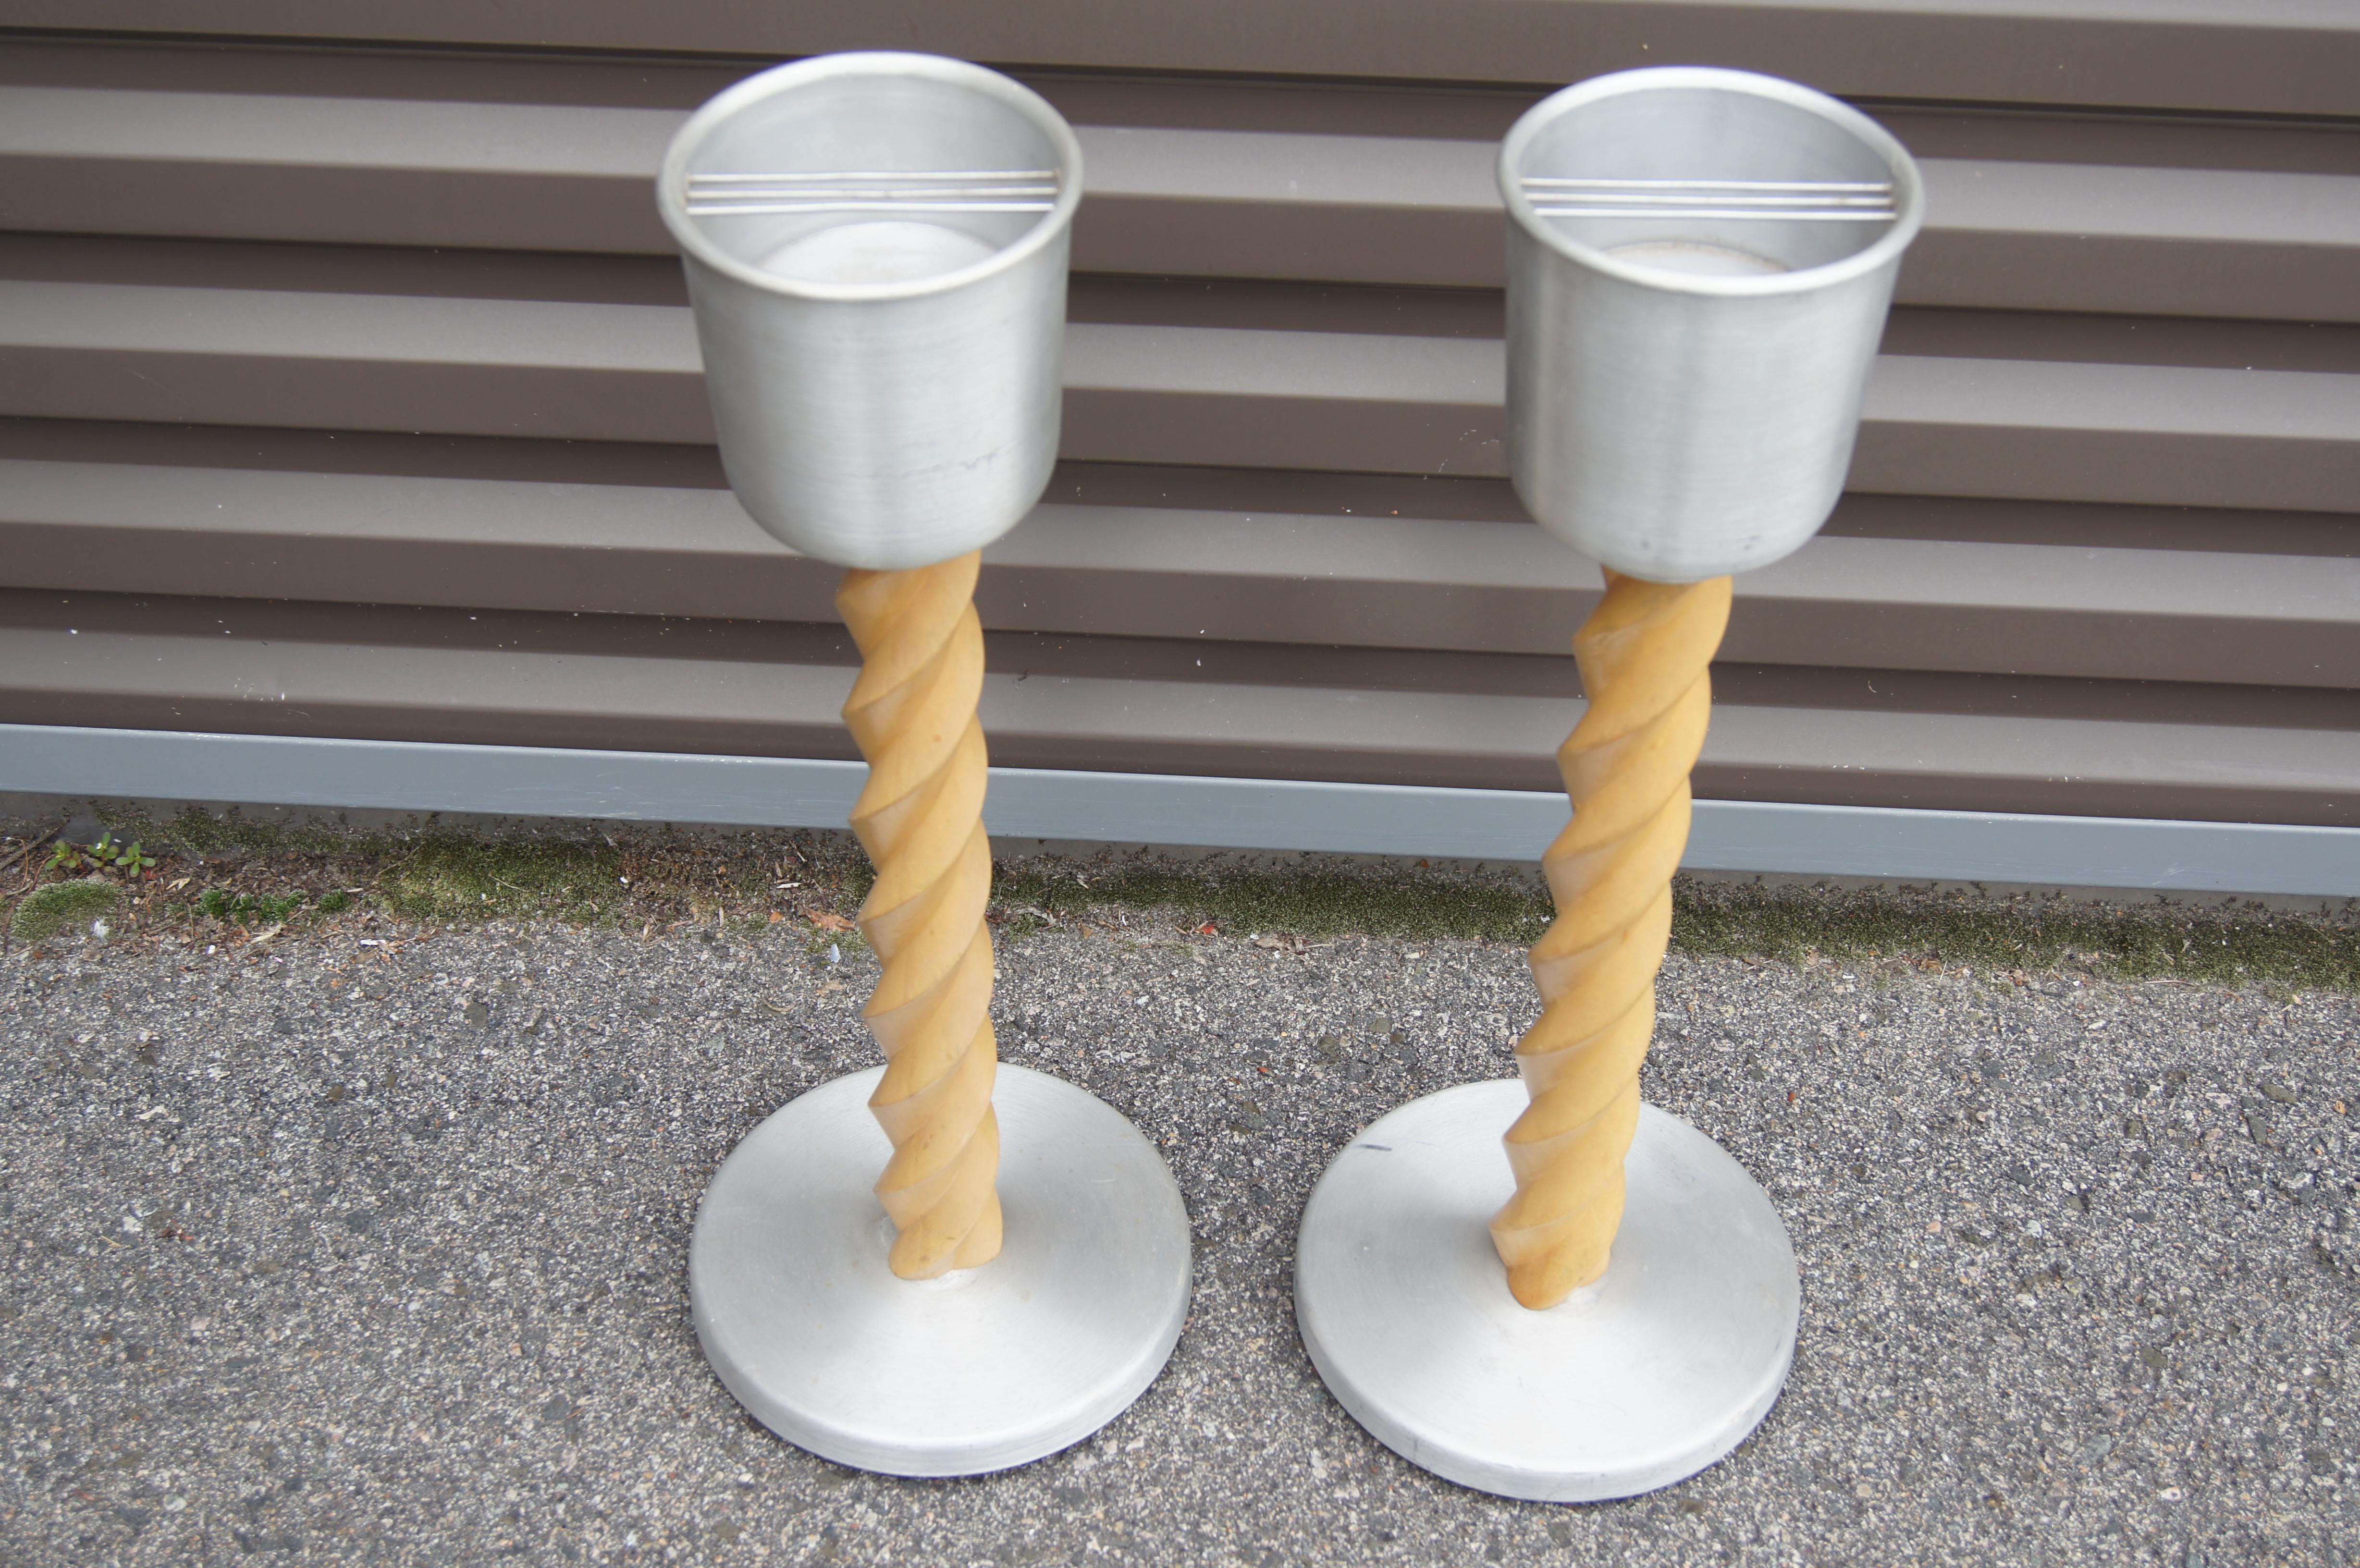 This pair of 1930s standing ashtrays are attributed to Russel Wright. Each Machine Age smoking stand features a turned oak support between a spun aluminum base and a deep receptacle for cigarette ash.